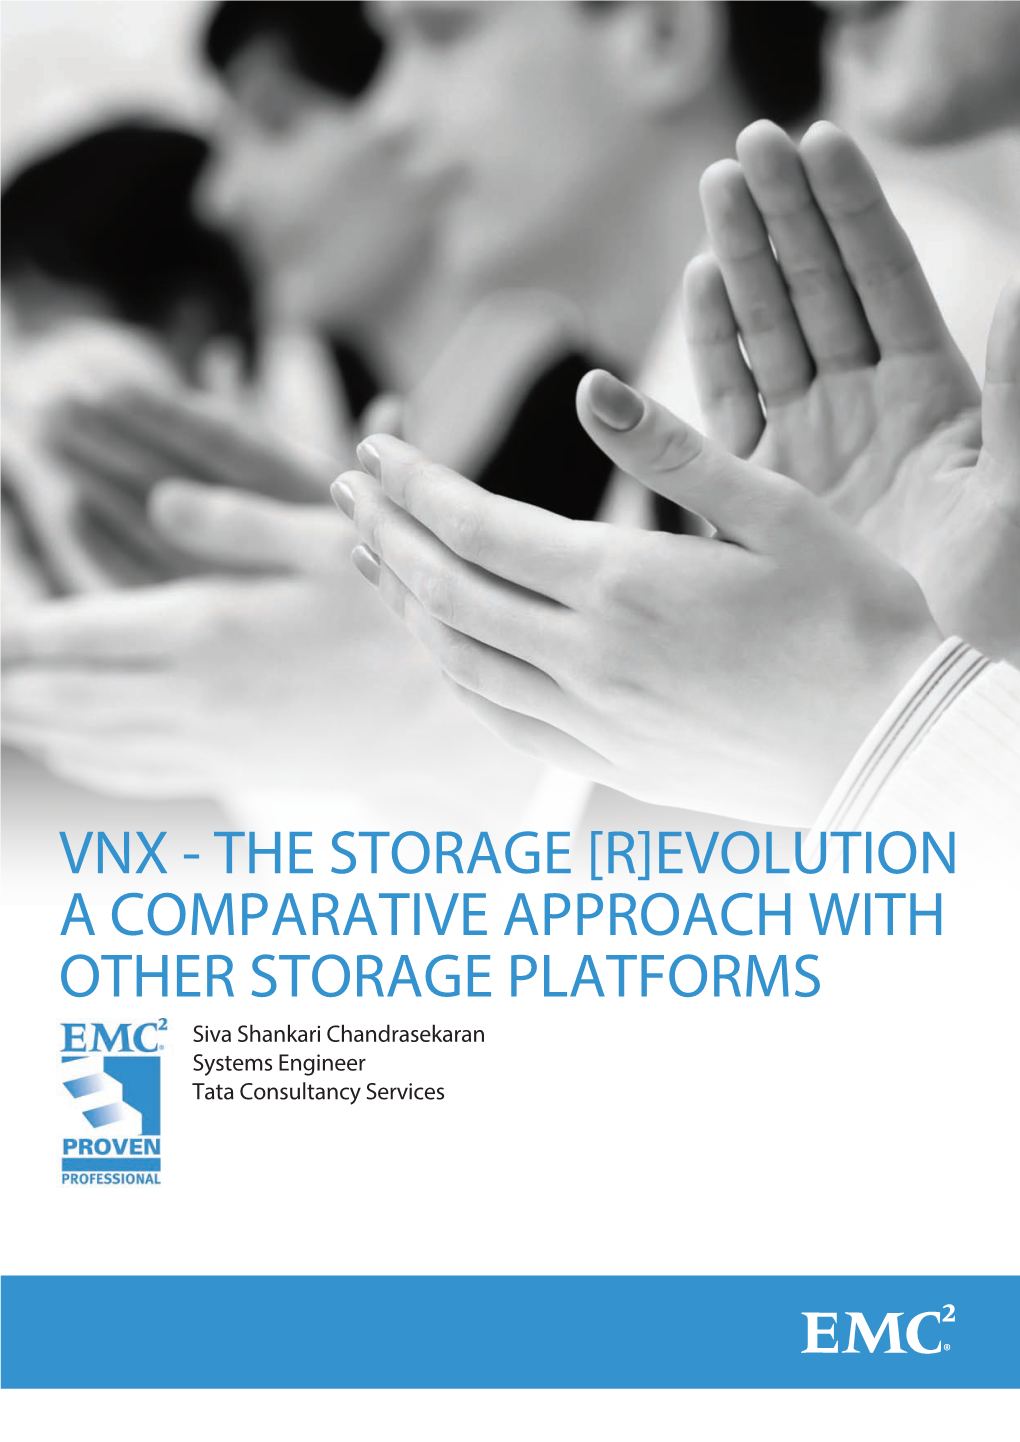 VNX - the STORAGE [R]EVOLUTION a COMPARATIVE APPROACH with OTHER STORAGE PLATFORMS Siva Shankari Chandrasekaran Systems Engineer Tata Consultancy Services